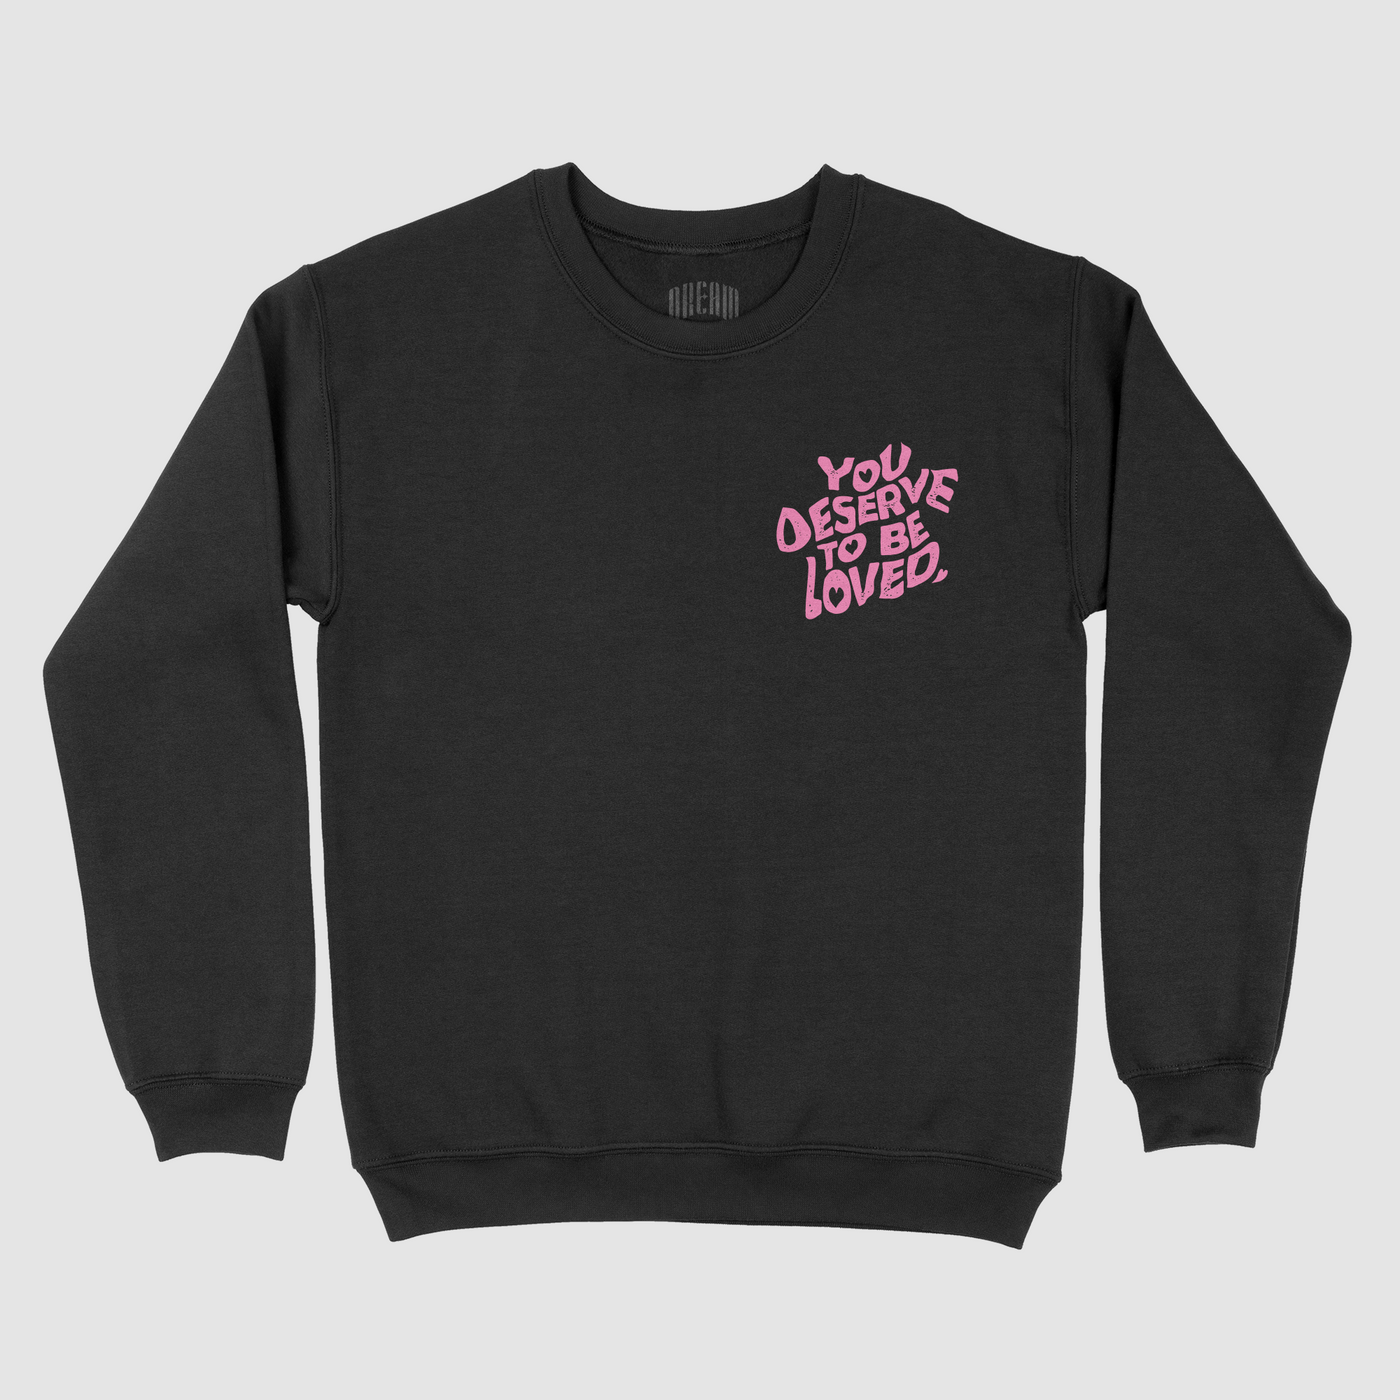 You Deserve To Be Loved Crewneck Sweater